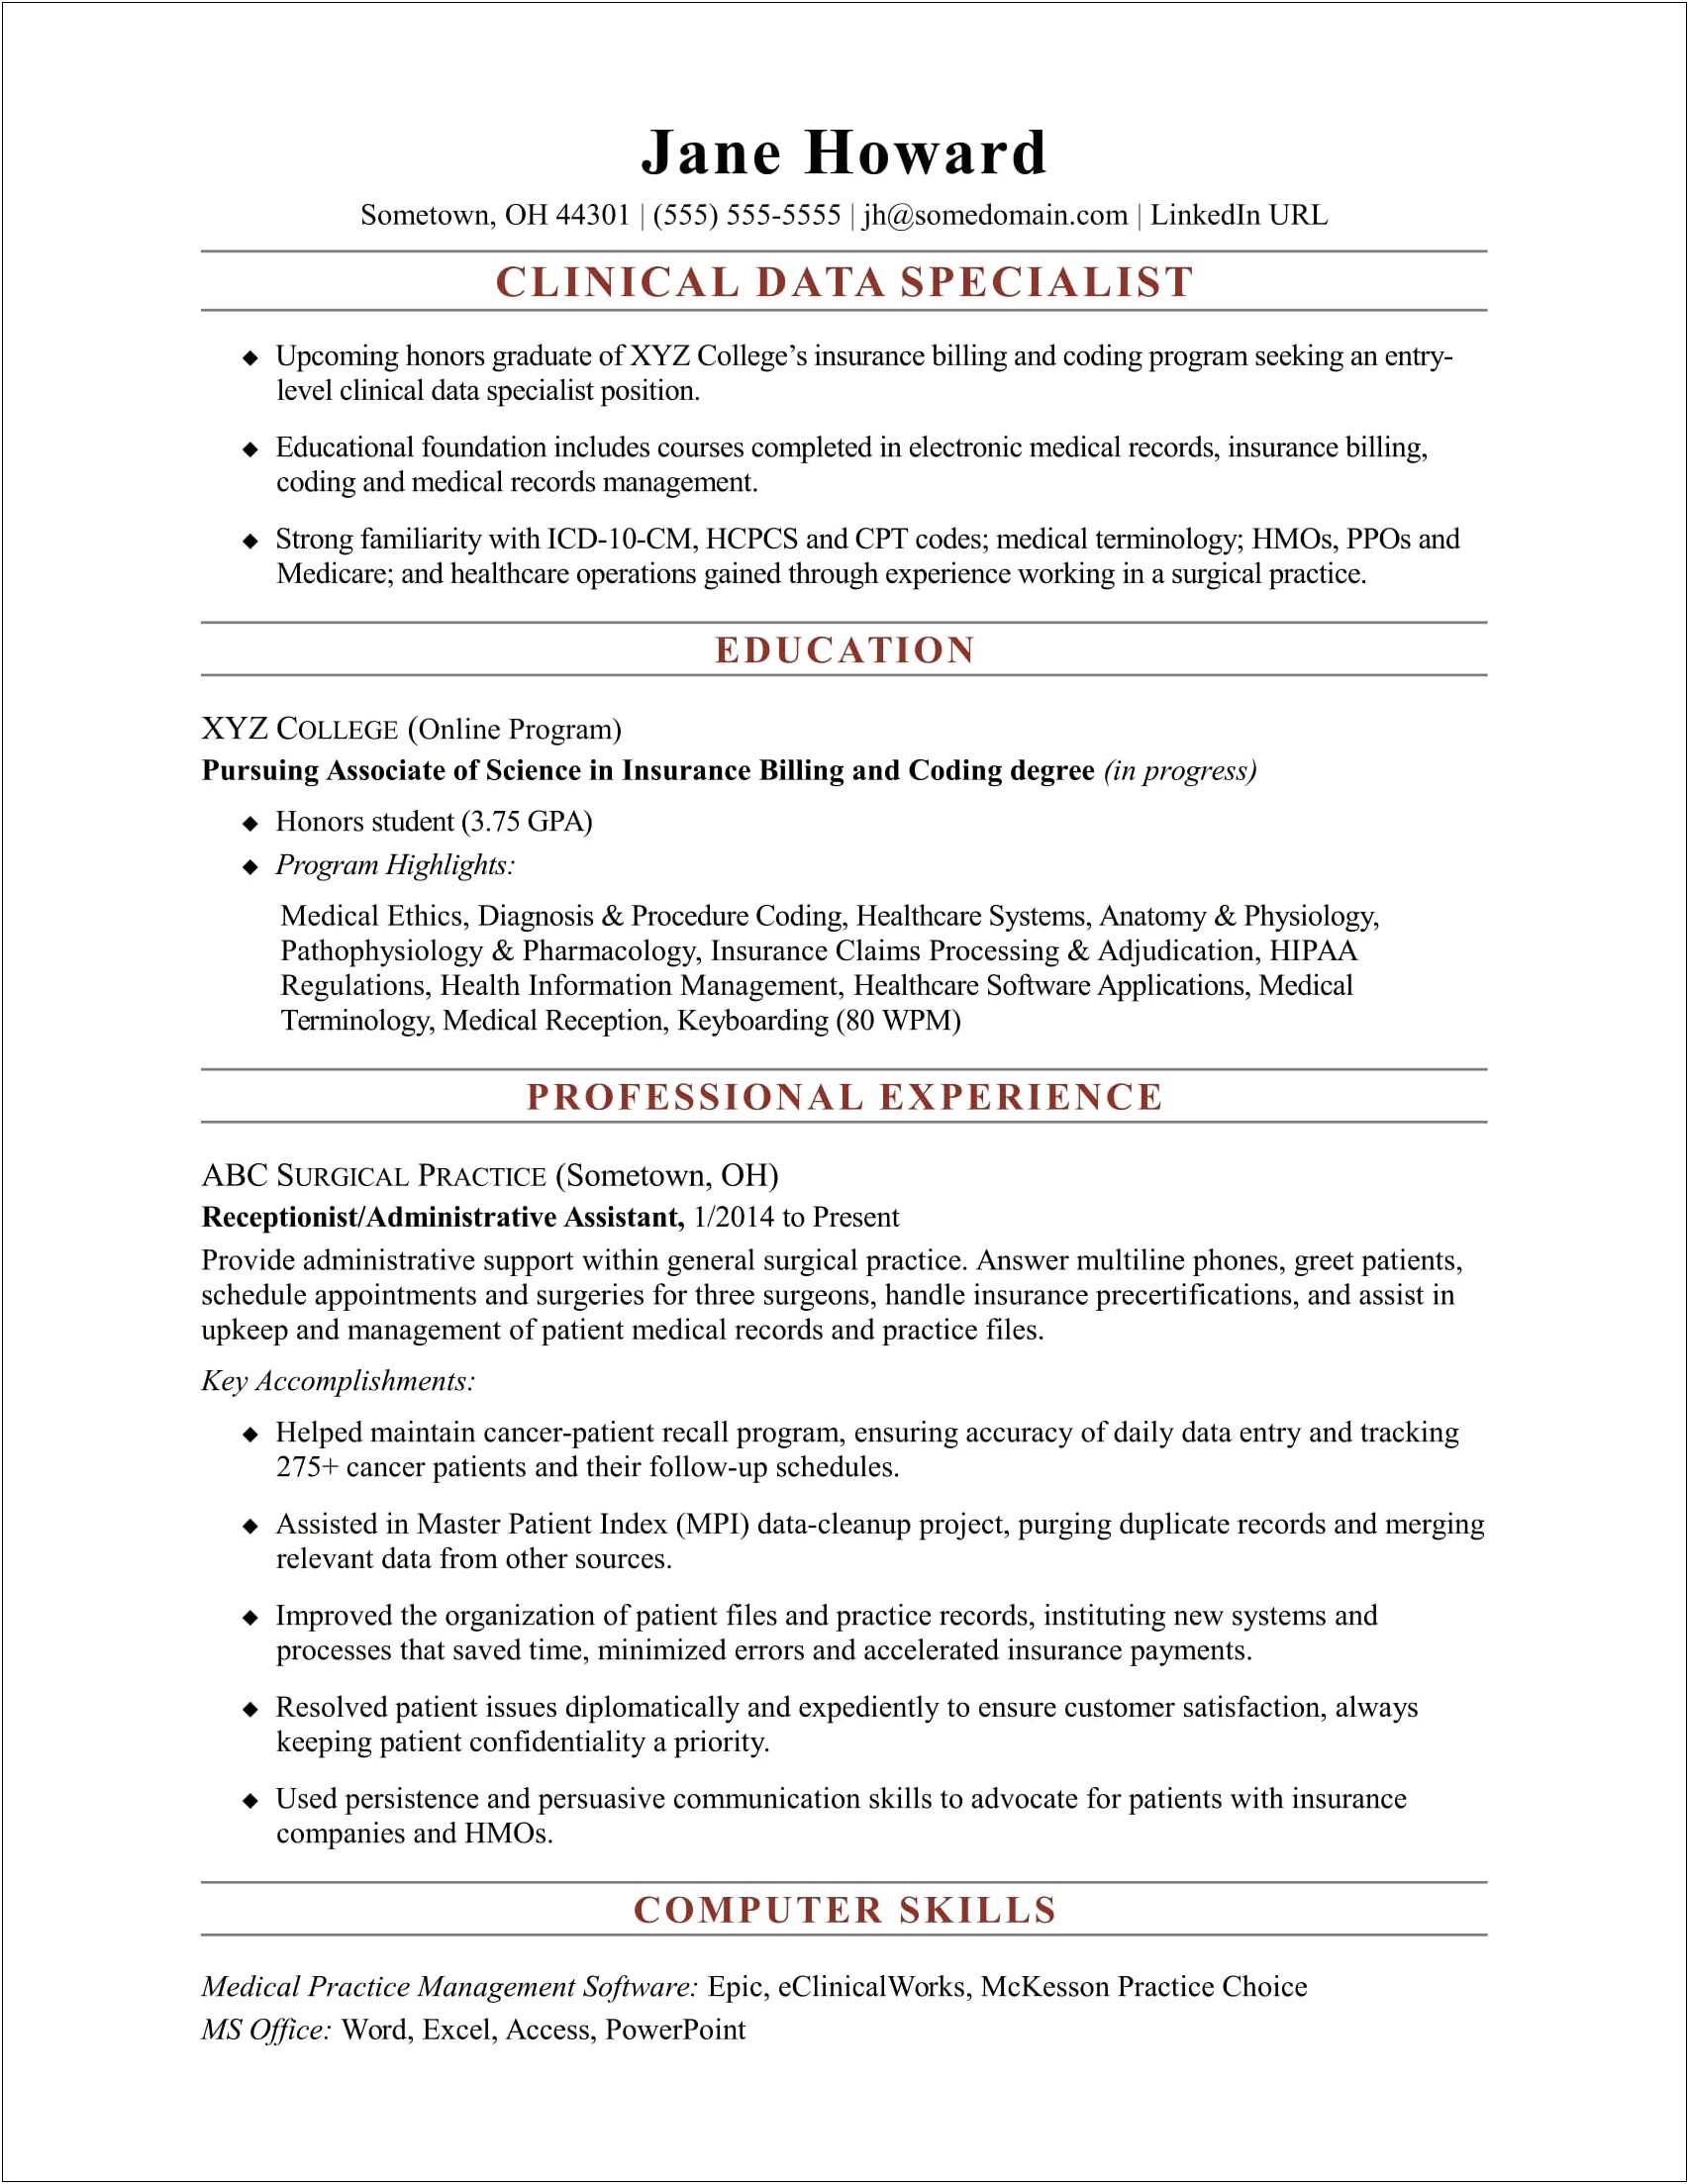 Sample Resume For Clinical Director